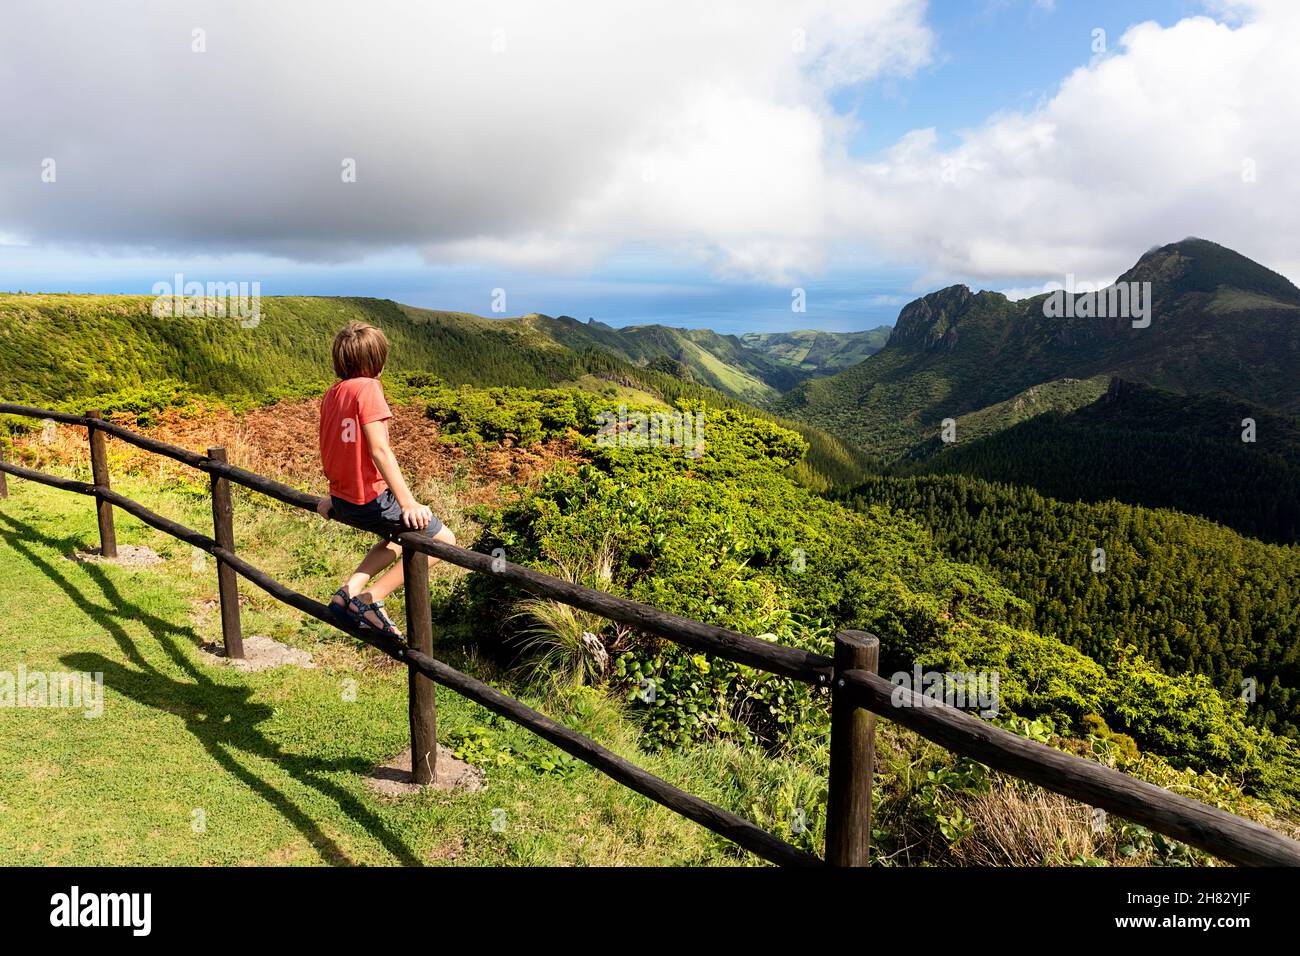 Boy in red t shirt sitting on wooden fence at viewpoint Miradouro do Vale da Fazenda viewpoint in Flores, Azores, Portugal Stock Photo